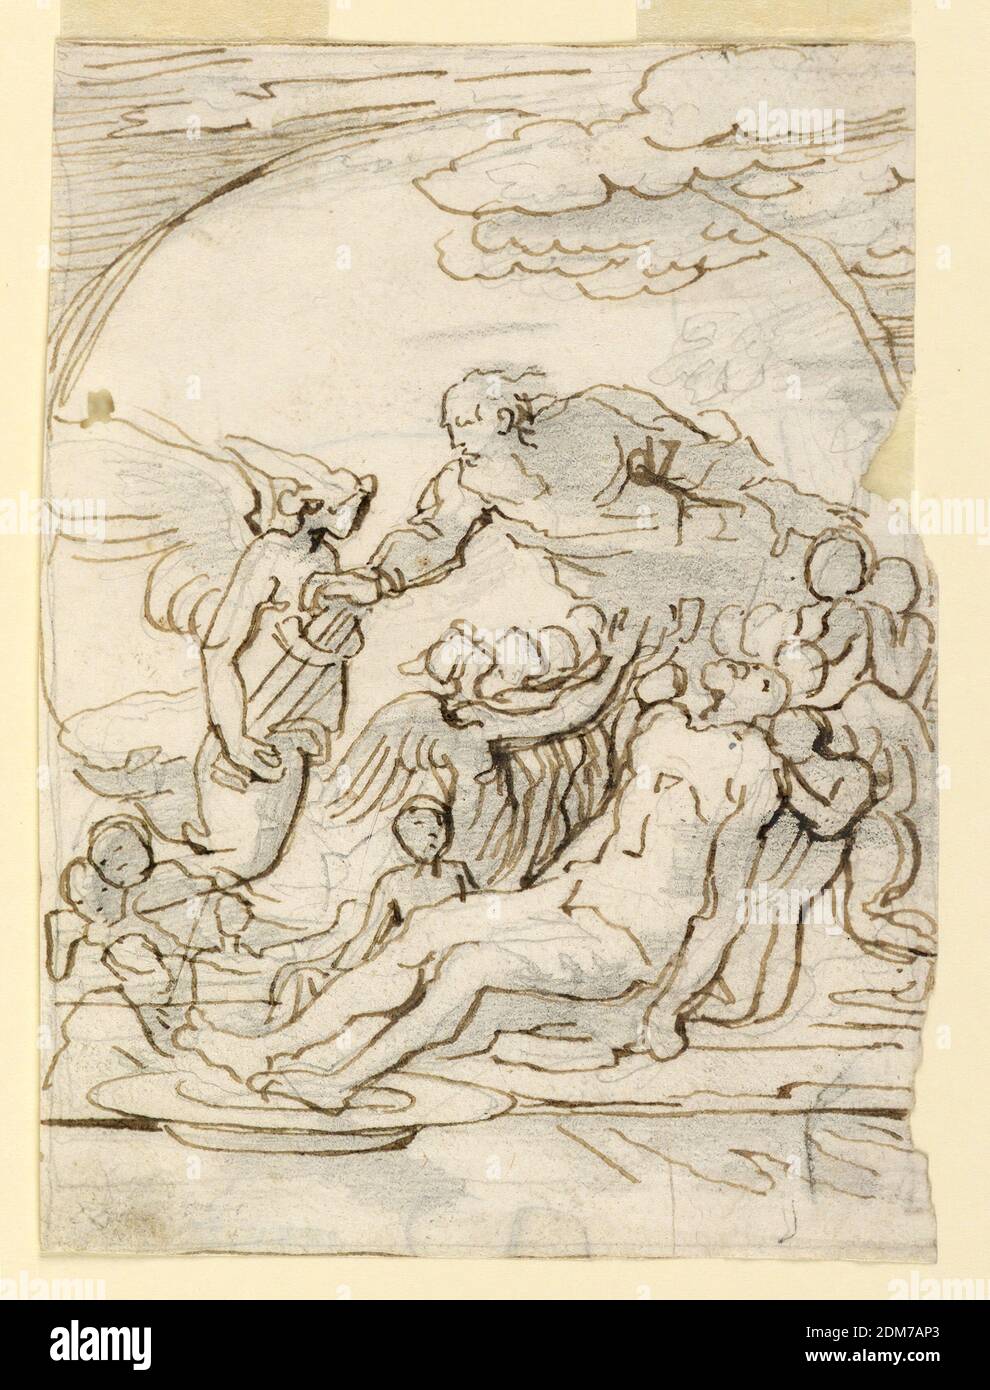 Sketch, Deposition (?) with Heavenly Figures, Fortunato Duranti, Italian, 1787 - 1863, Pen and ink, graphite, on paper, Sketch, Deposition (?) with Heavenly Figures., Rome, Italy, 1820–1850, Drawing Stock Photo